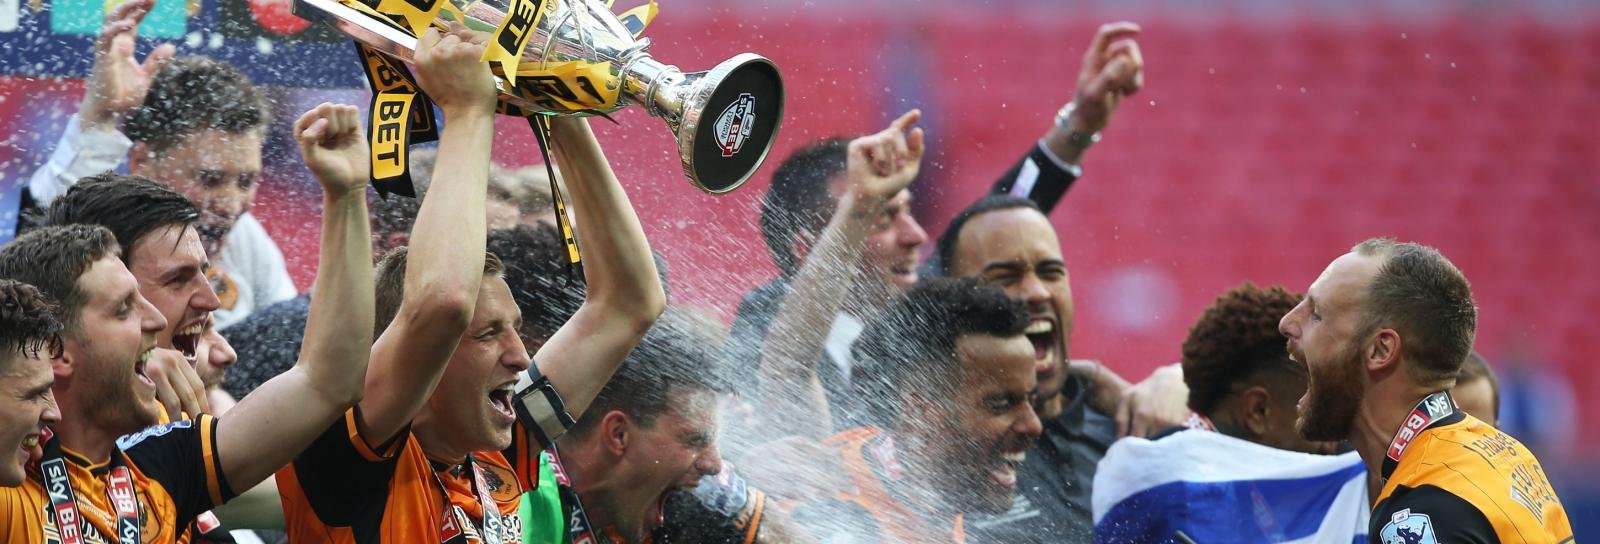 Hull City seal promotion back to the Premier League after Championship play-off victory